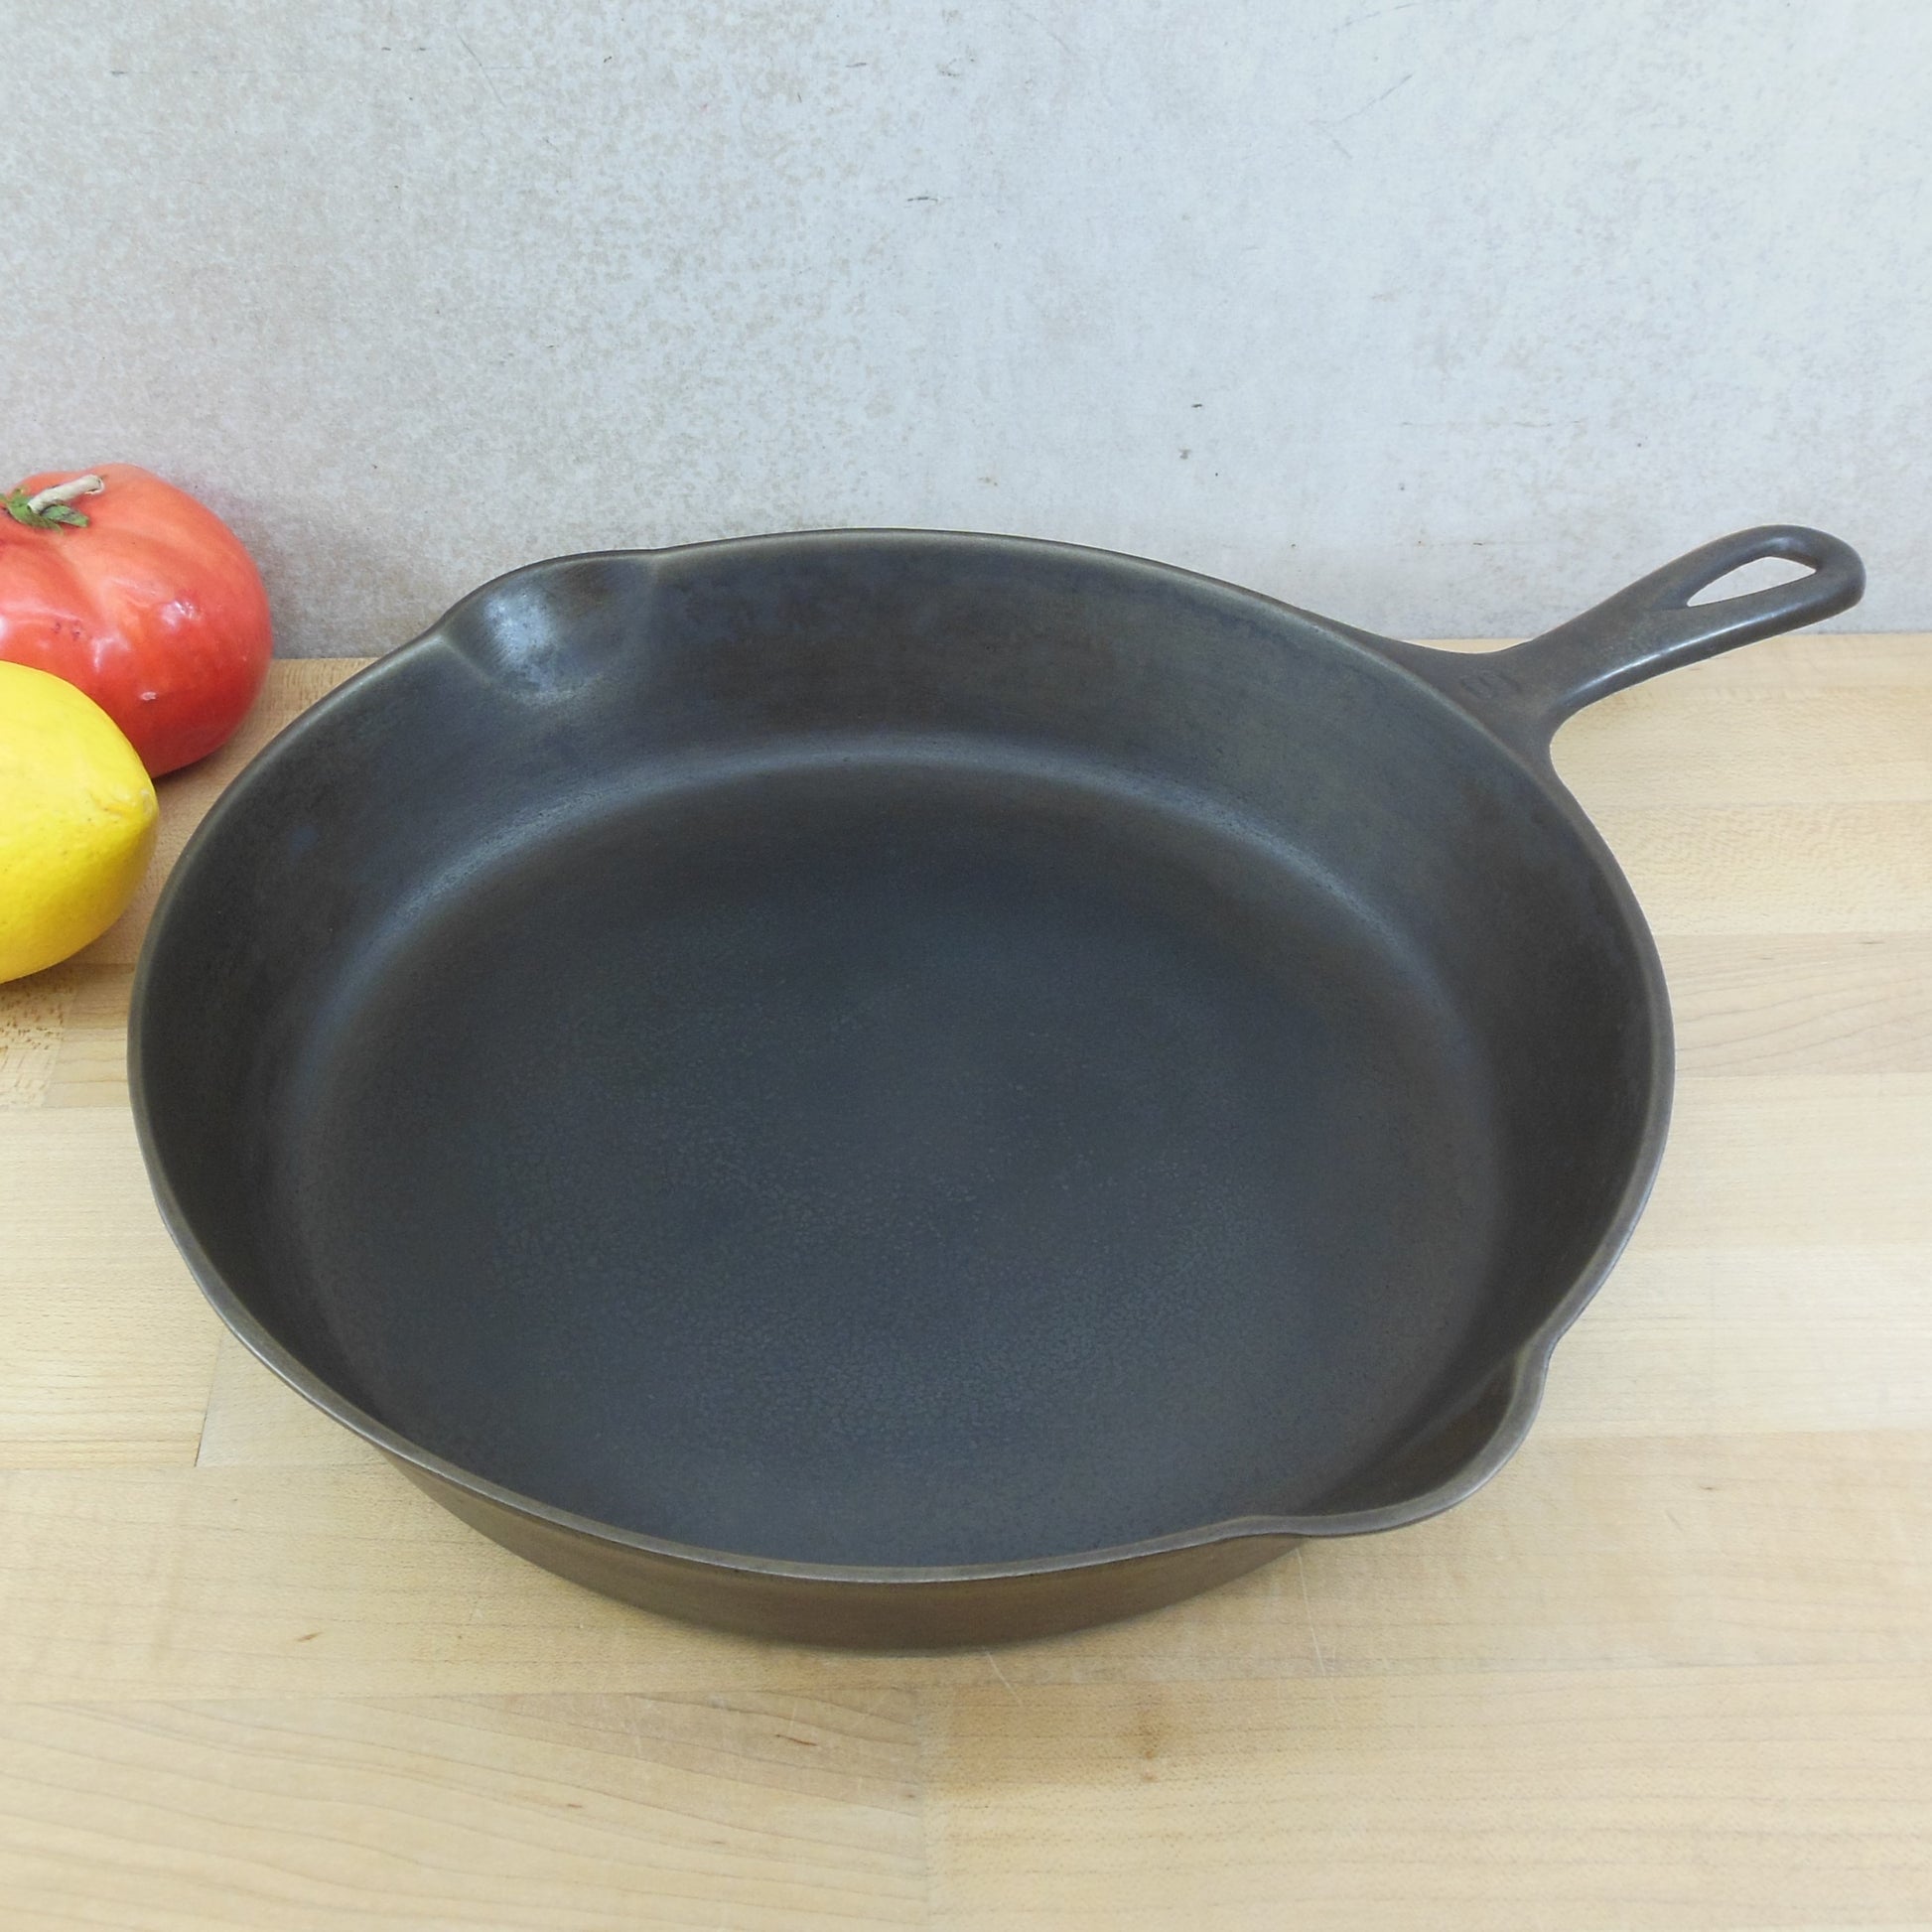 Season Cast Iron Pan Skillet Griddle Mothers Day Present 00  Sunny 101.9 -  Marquette, Michigan Radio- mediaBrew Communications